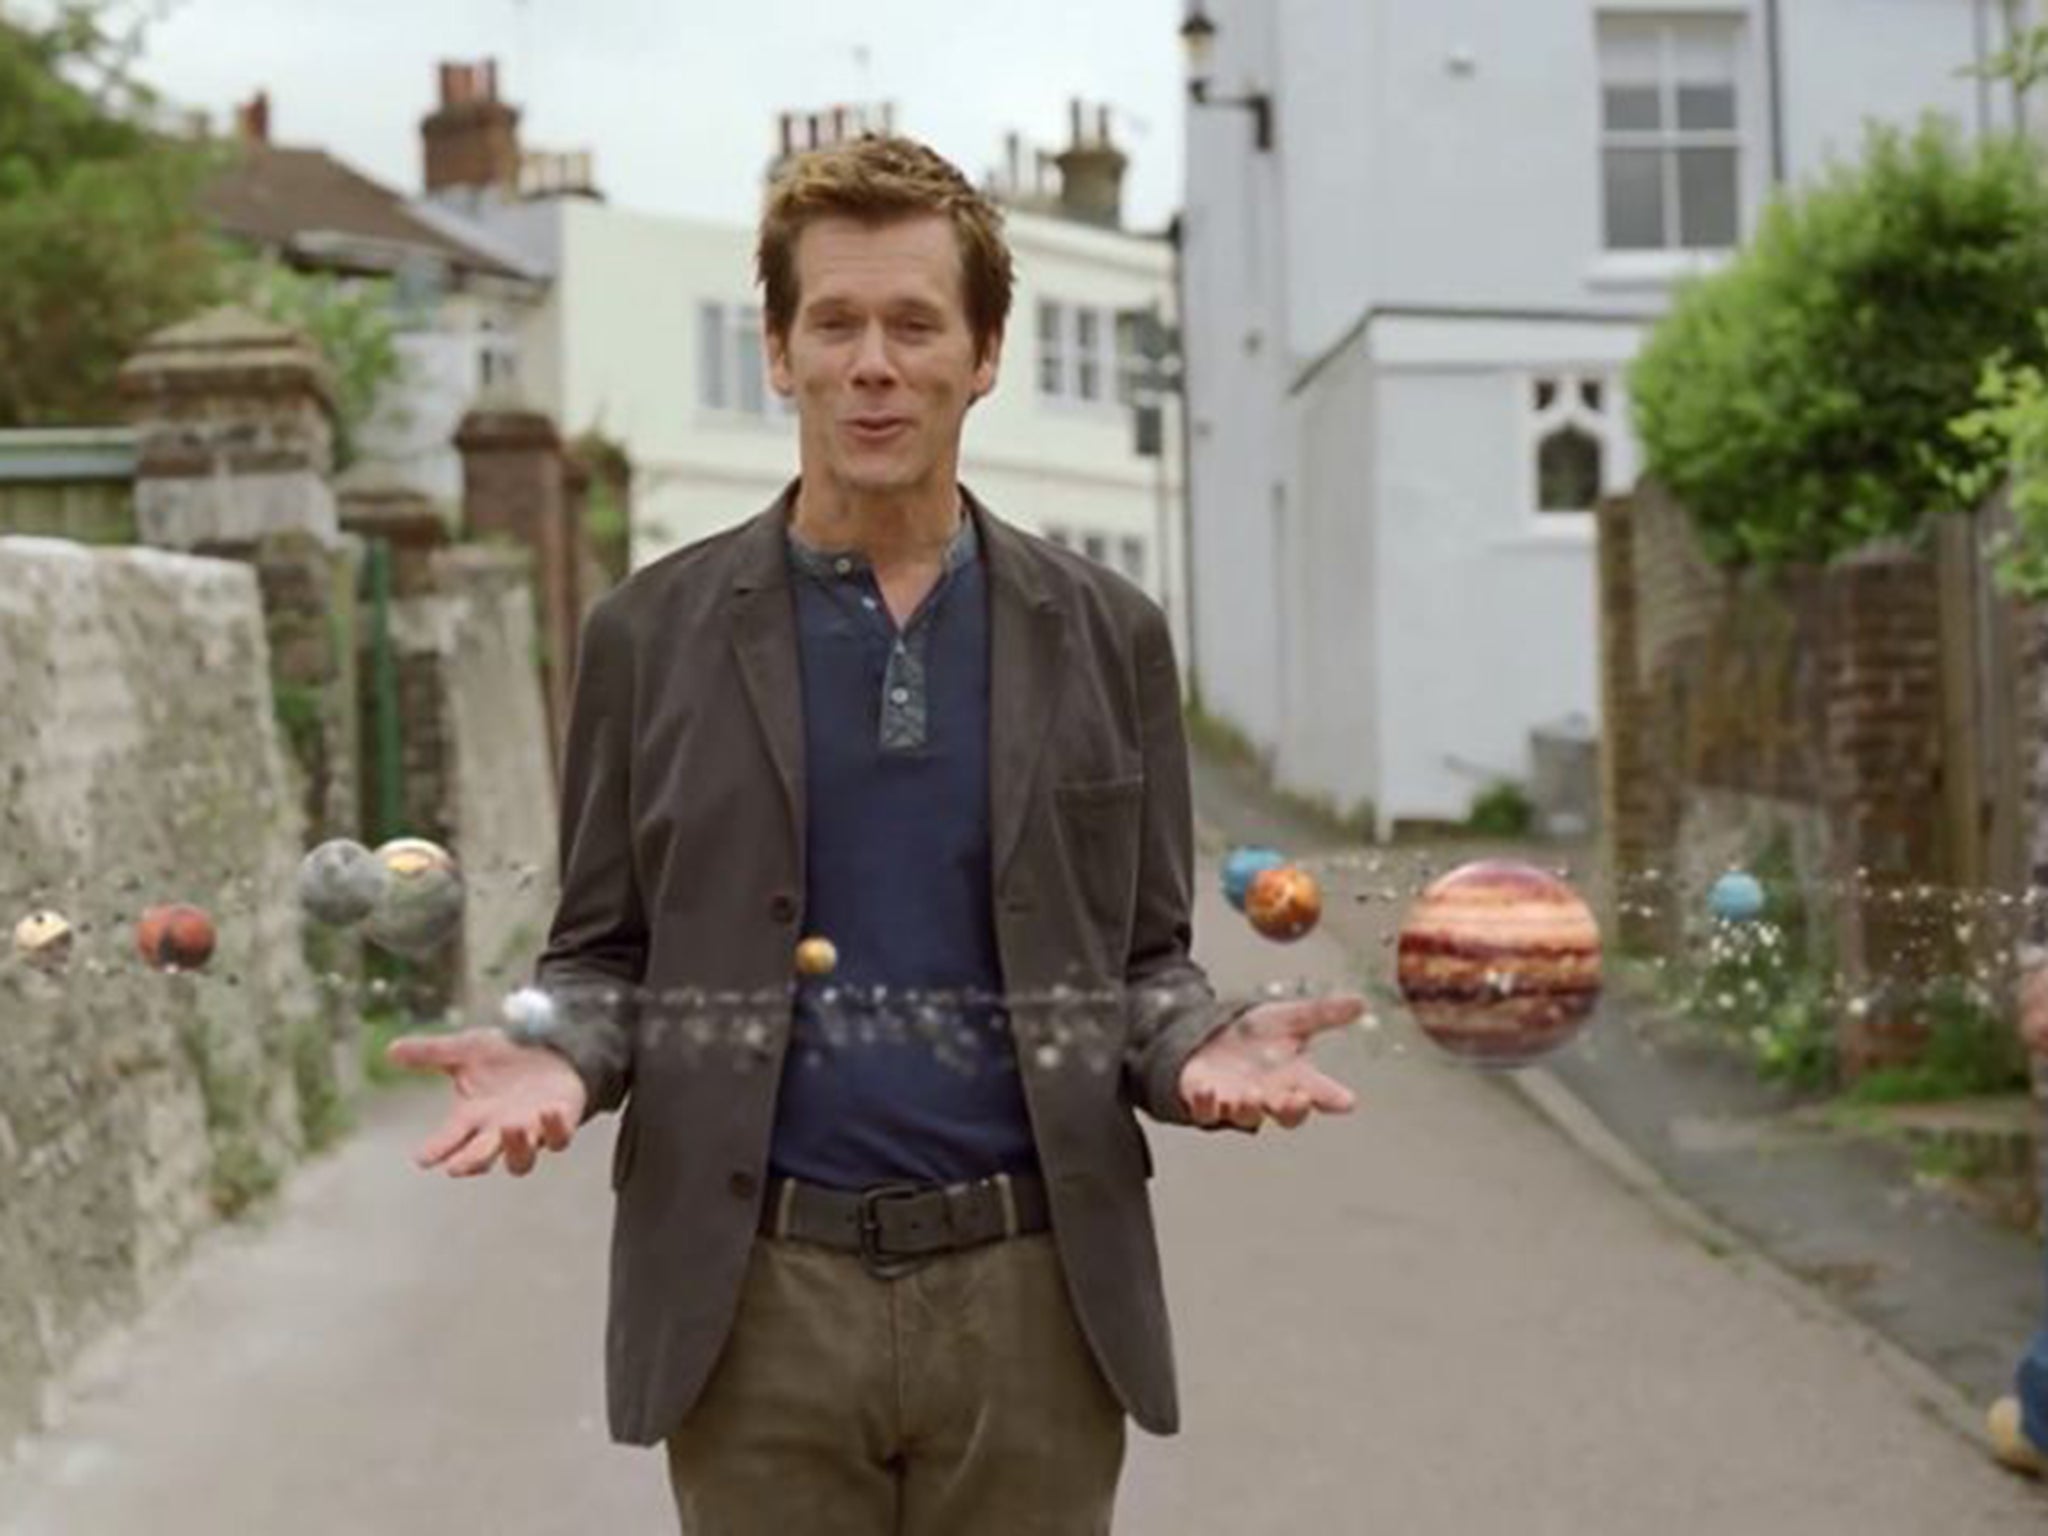 EE brand ambassador Kevin Bacon. The network is being taken over by BT